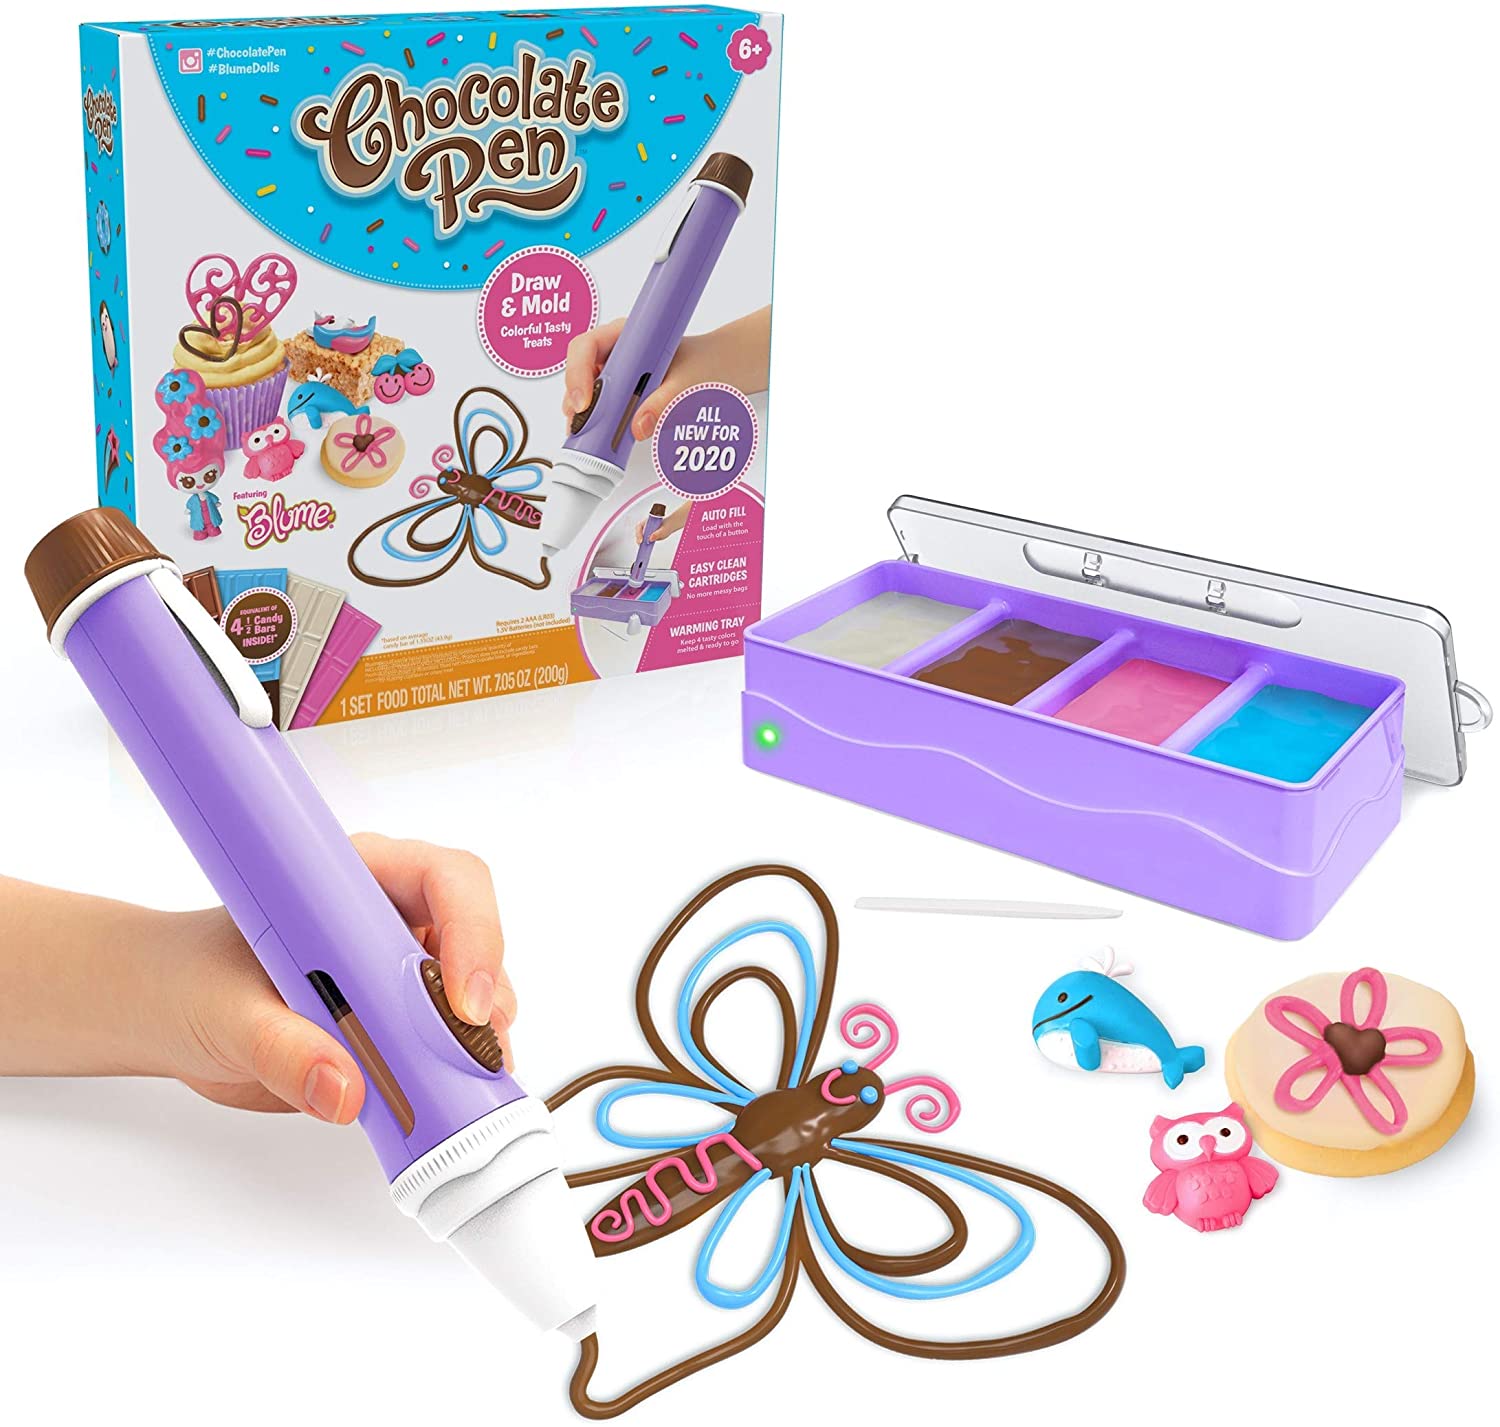 Real Cooking Chocolate Pen — Draw in Chocolate and DIY Your Own Baking Creations!